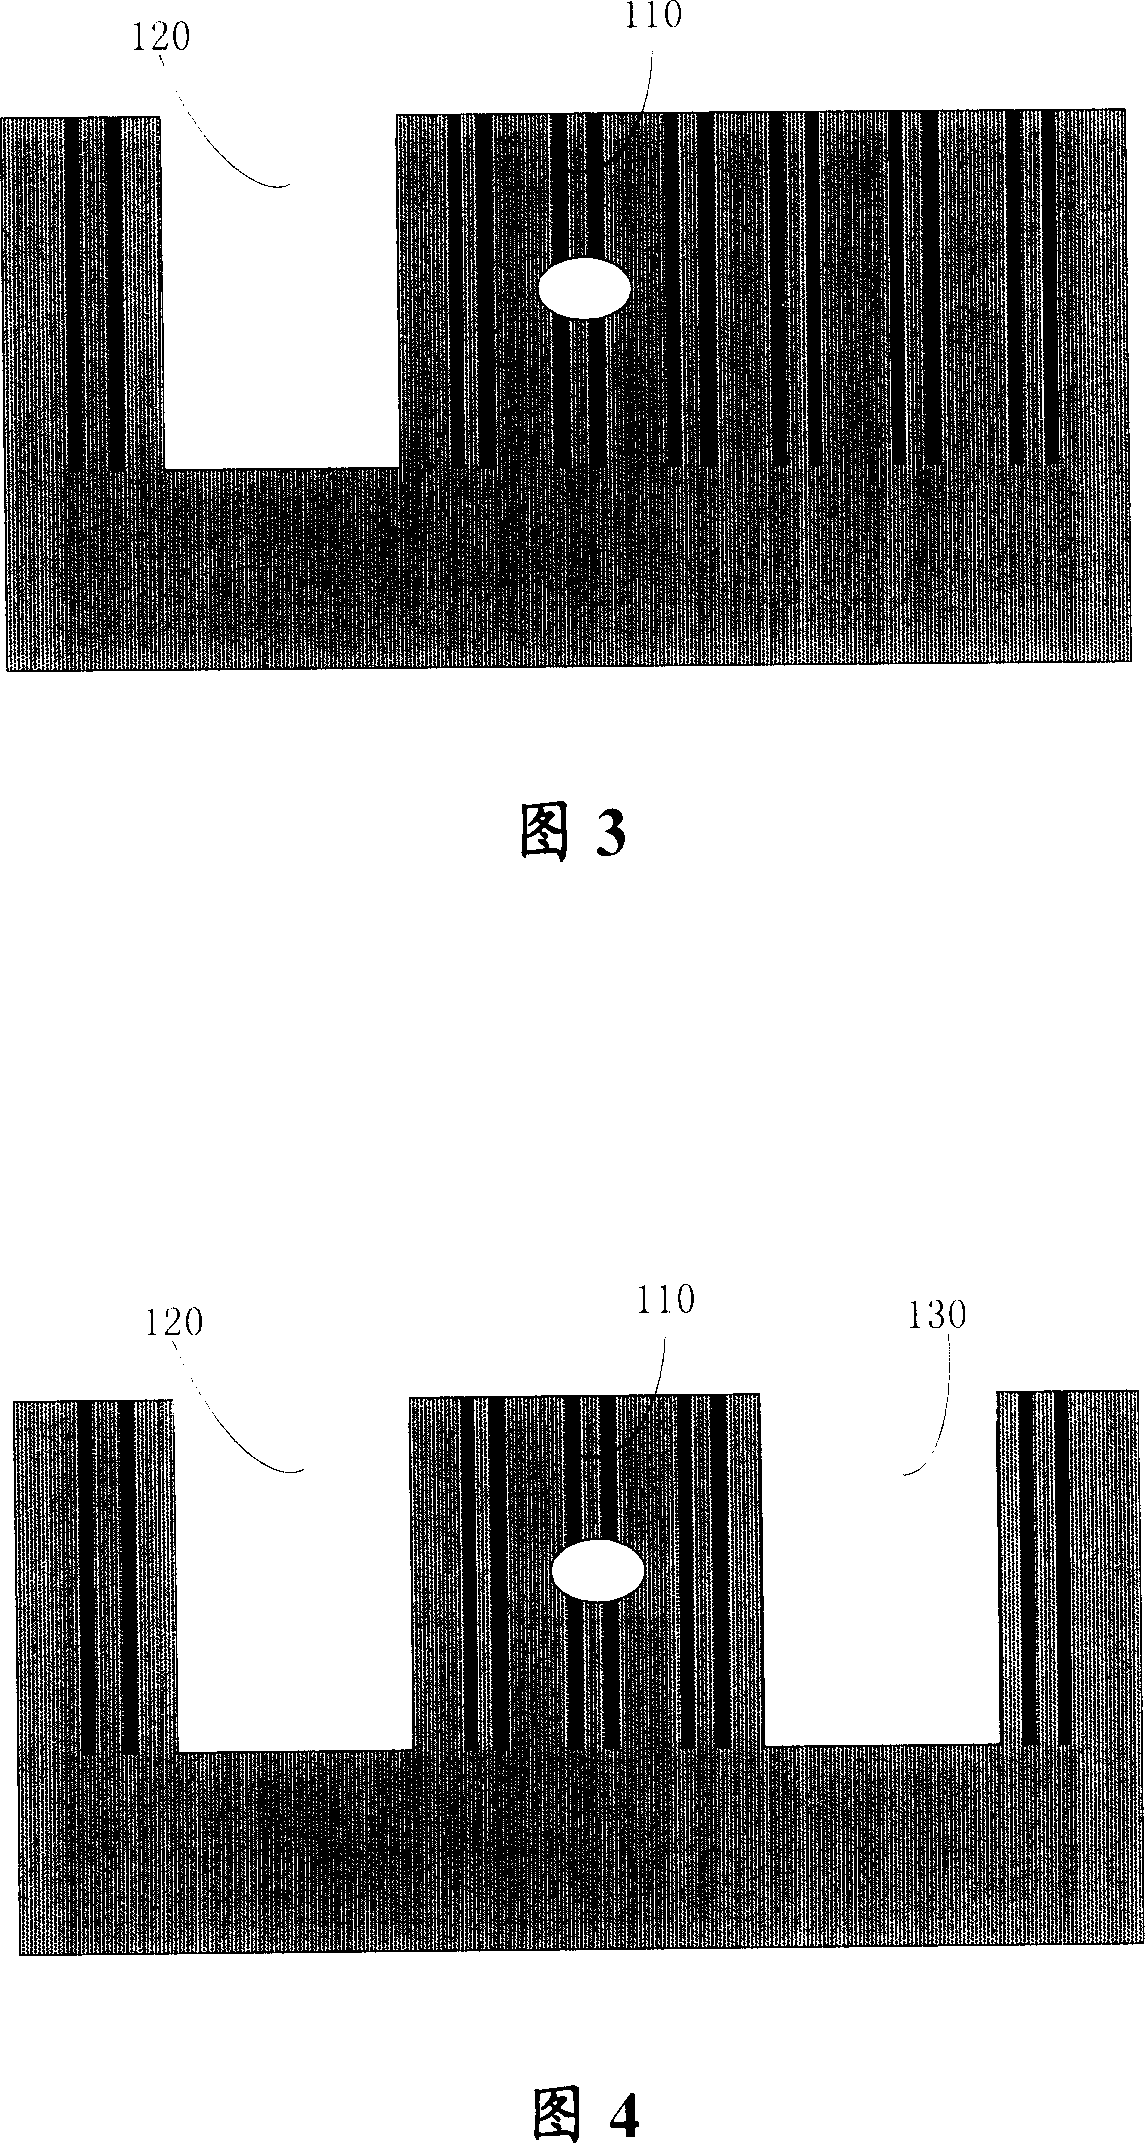 Method for detecting failure dapth of deep channel